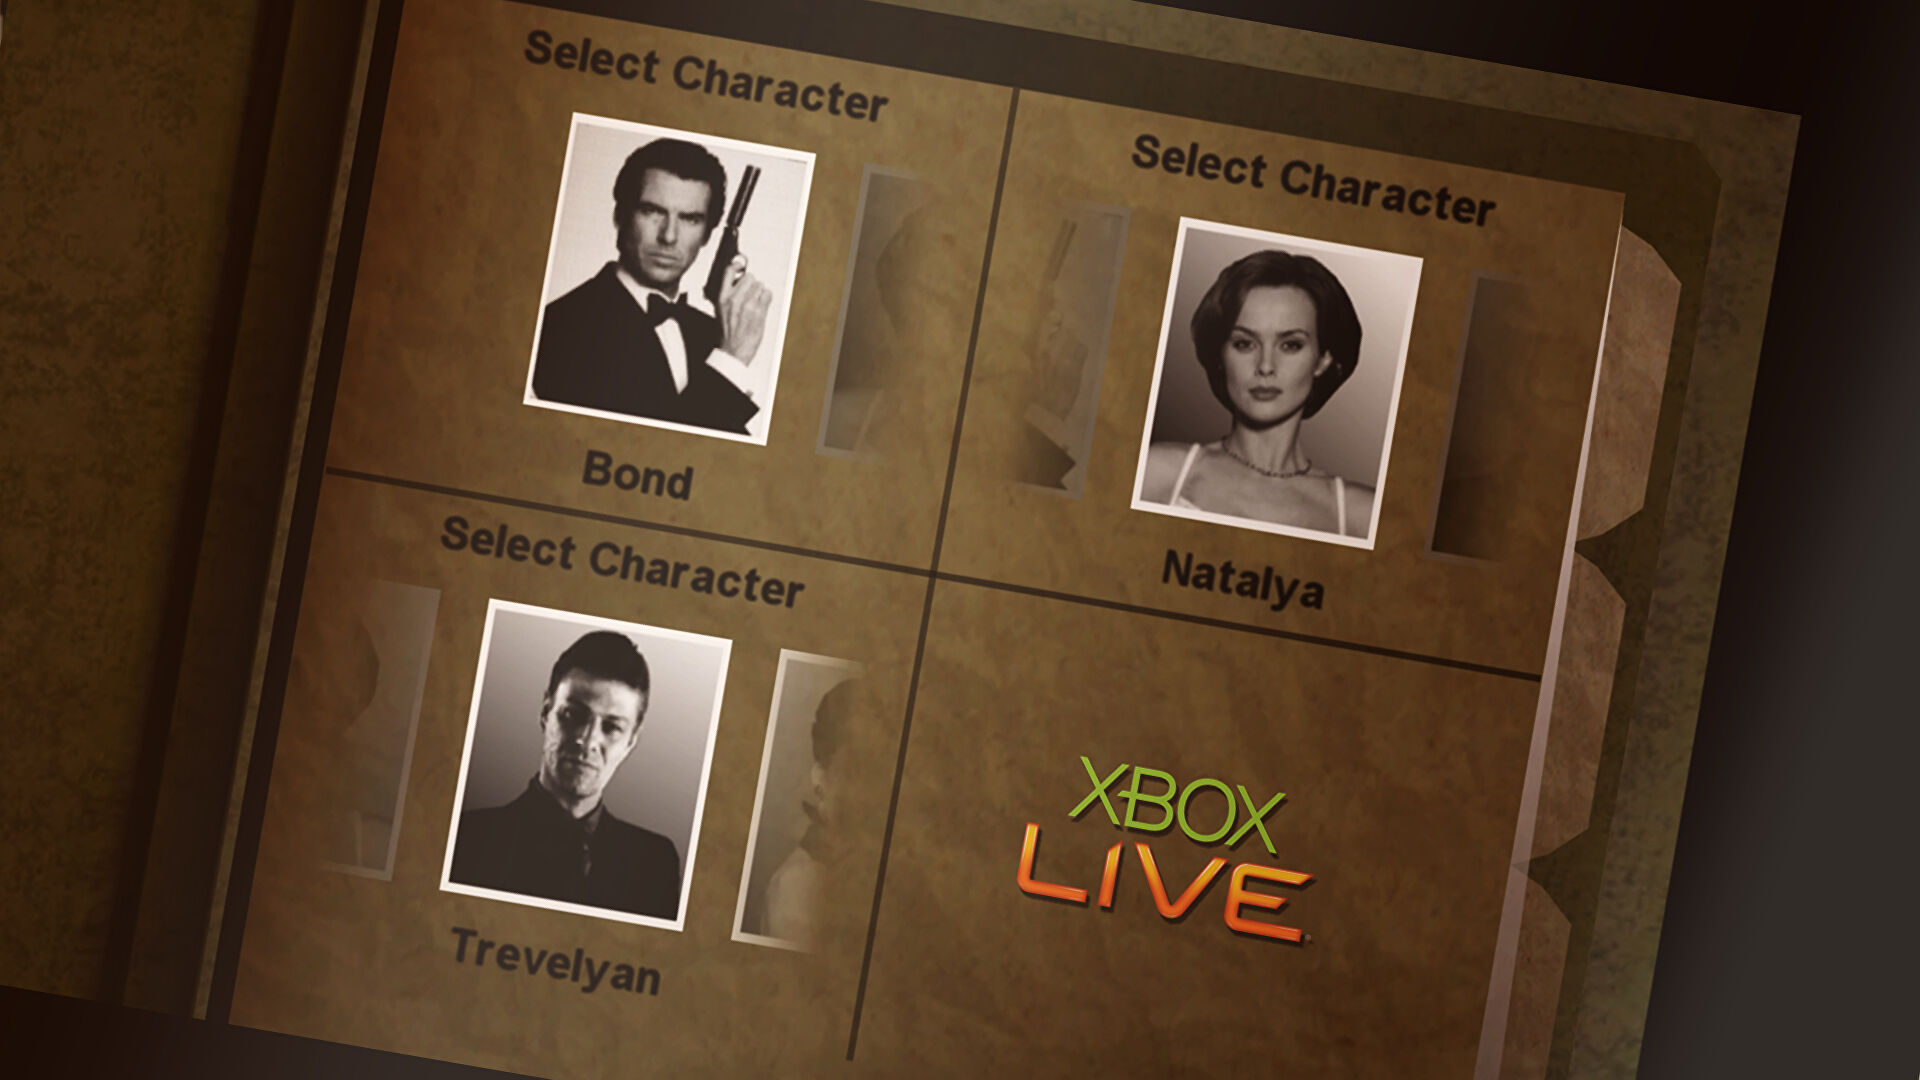 Want to play GoldenEye 007 multiplayer online on Xbox? There is a way – sort of